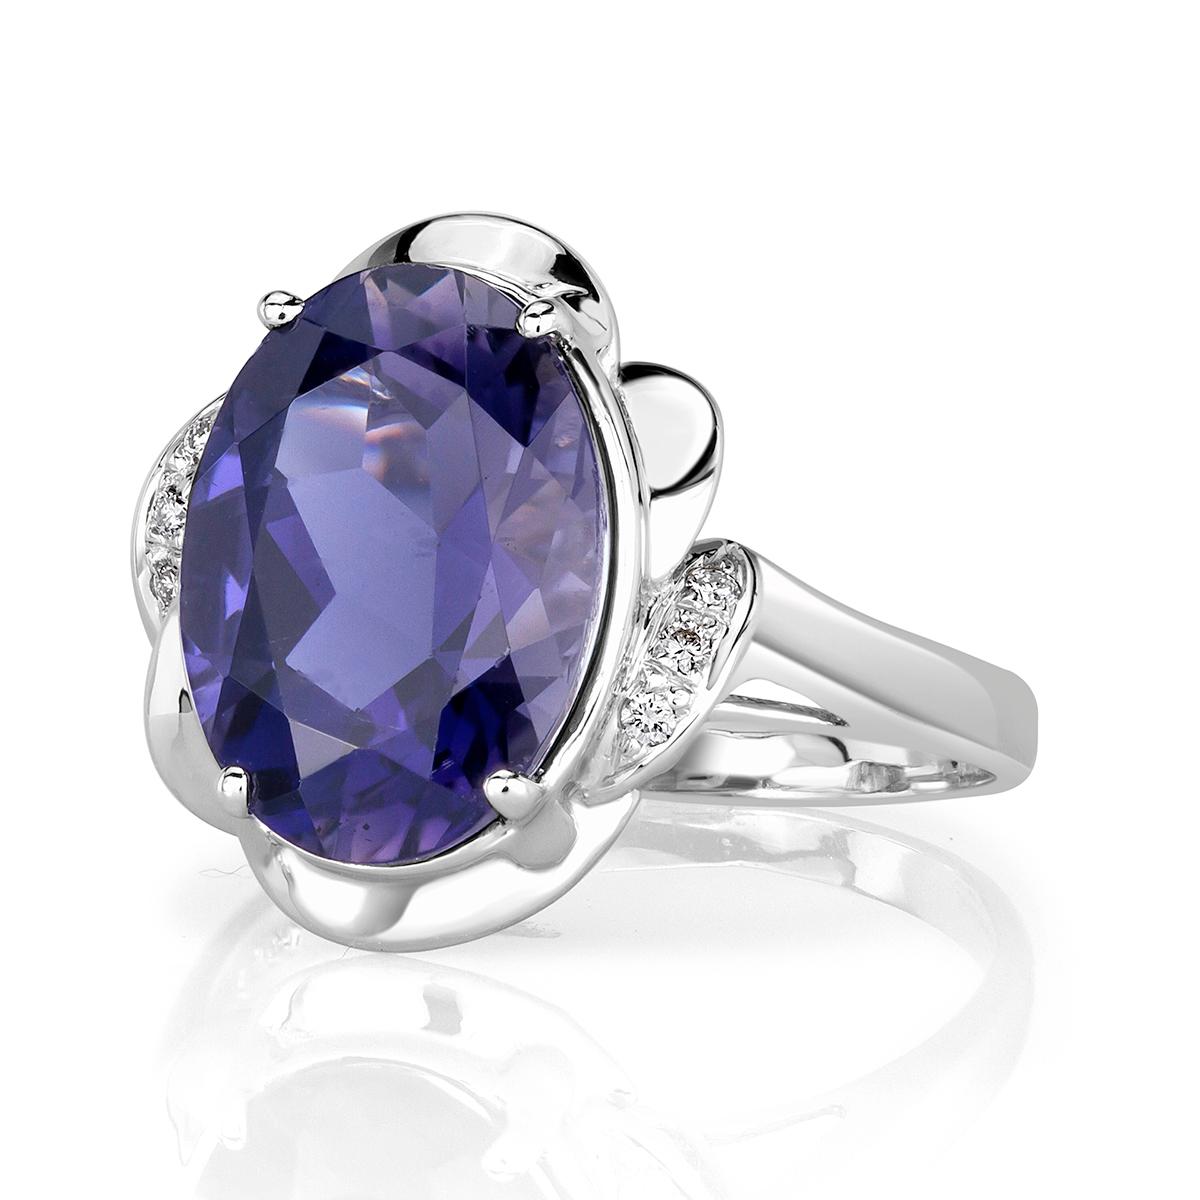 Designed in 18k white gold, this beautiful ring features a 4.81ct, GIA certified oval cut center Iolite. It is beautifully showcased in a floral center basket sprinkled with 0.06ct of shimmering round brilliant cut diamonds.